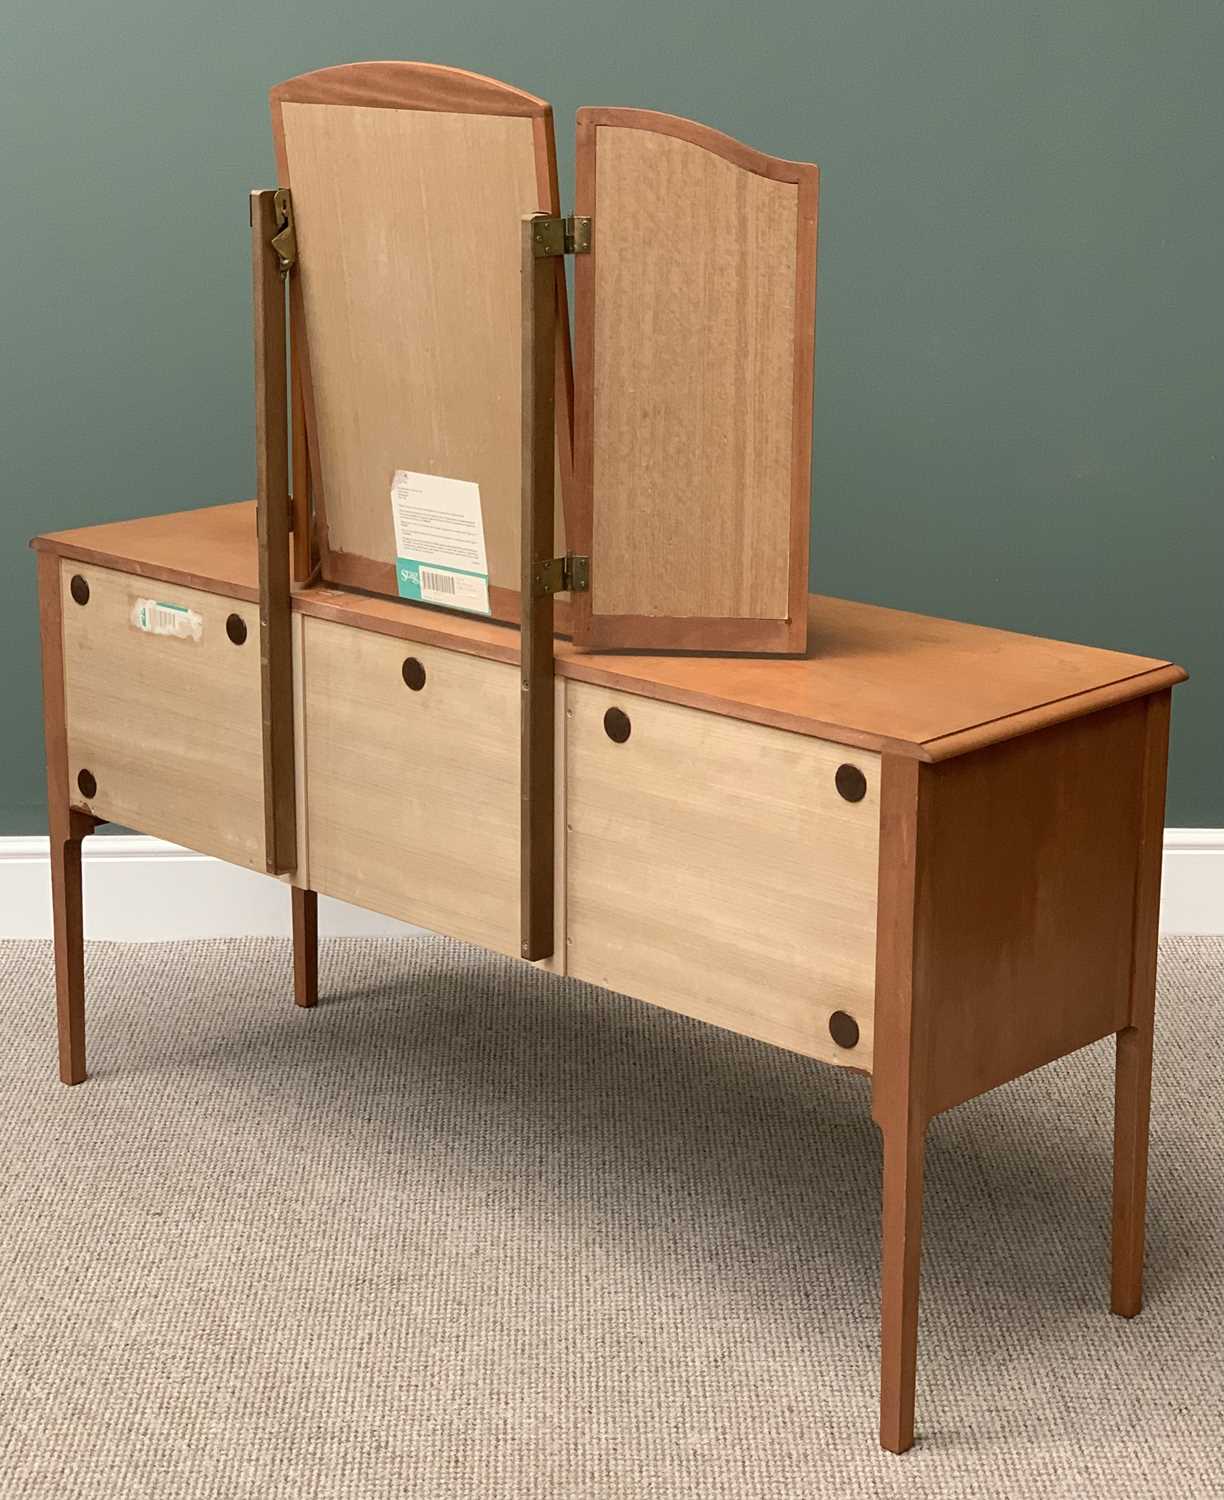 STAG LIGHT WOOD DRESSING TABLE, 136cms H, 147cms W, 46cms D - Image 3 of 4